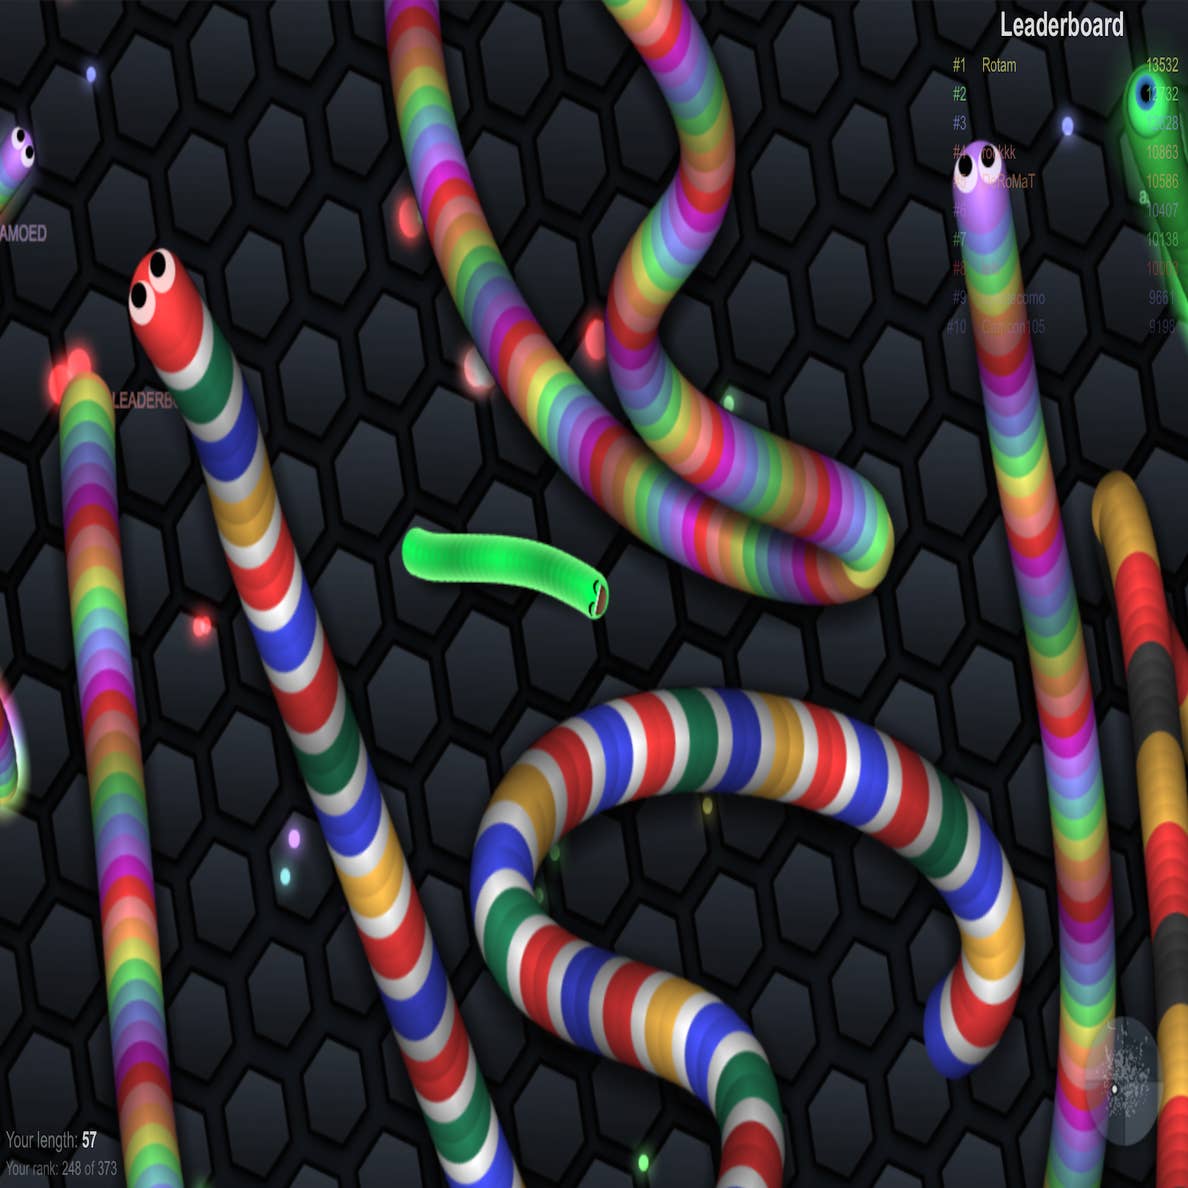 4 games that inspired slither.io